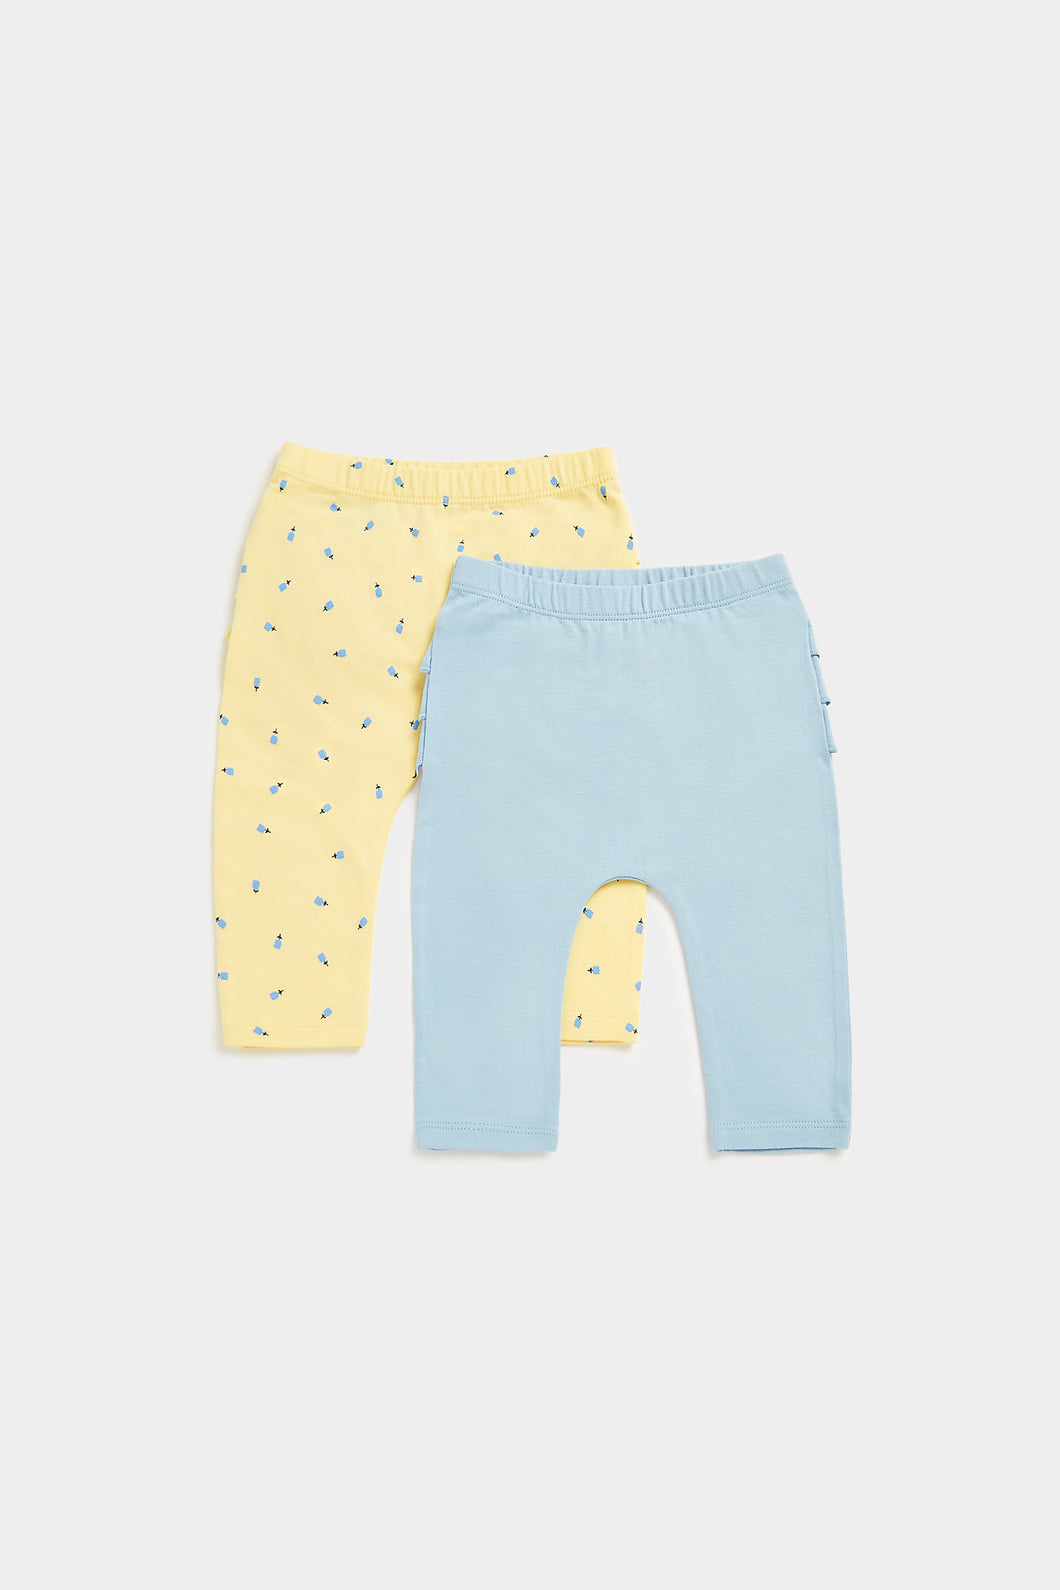 Mothercare Frilly Leggings - 2 Pack